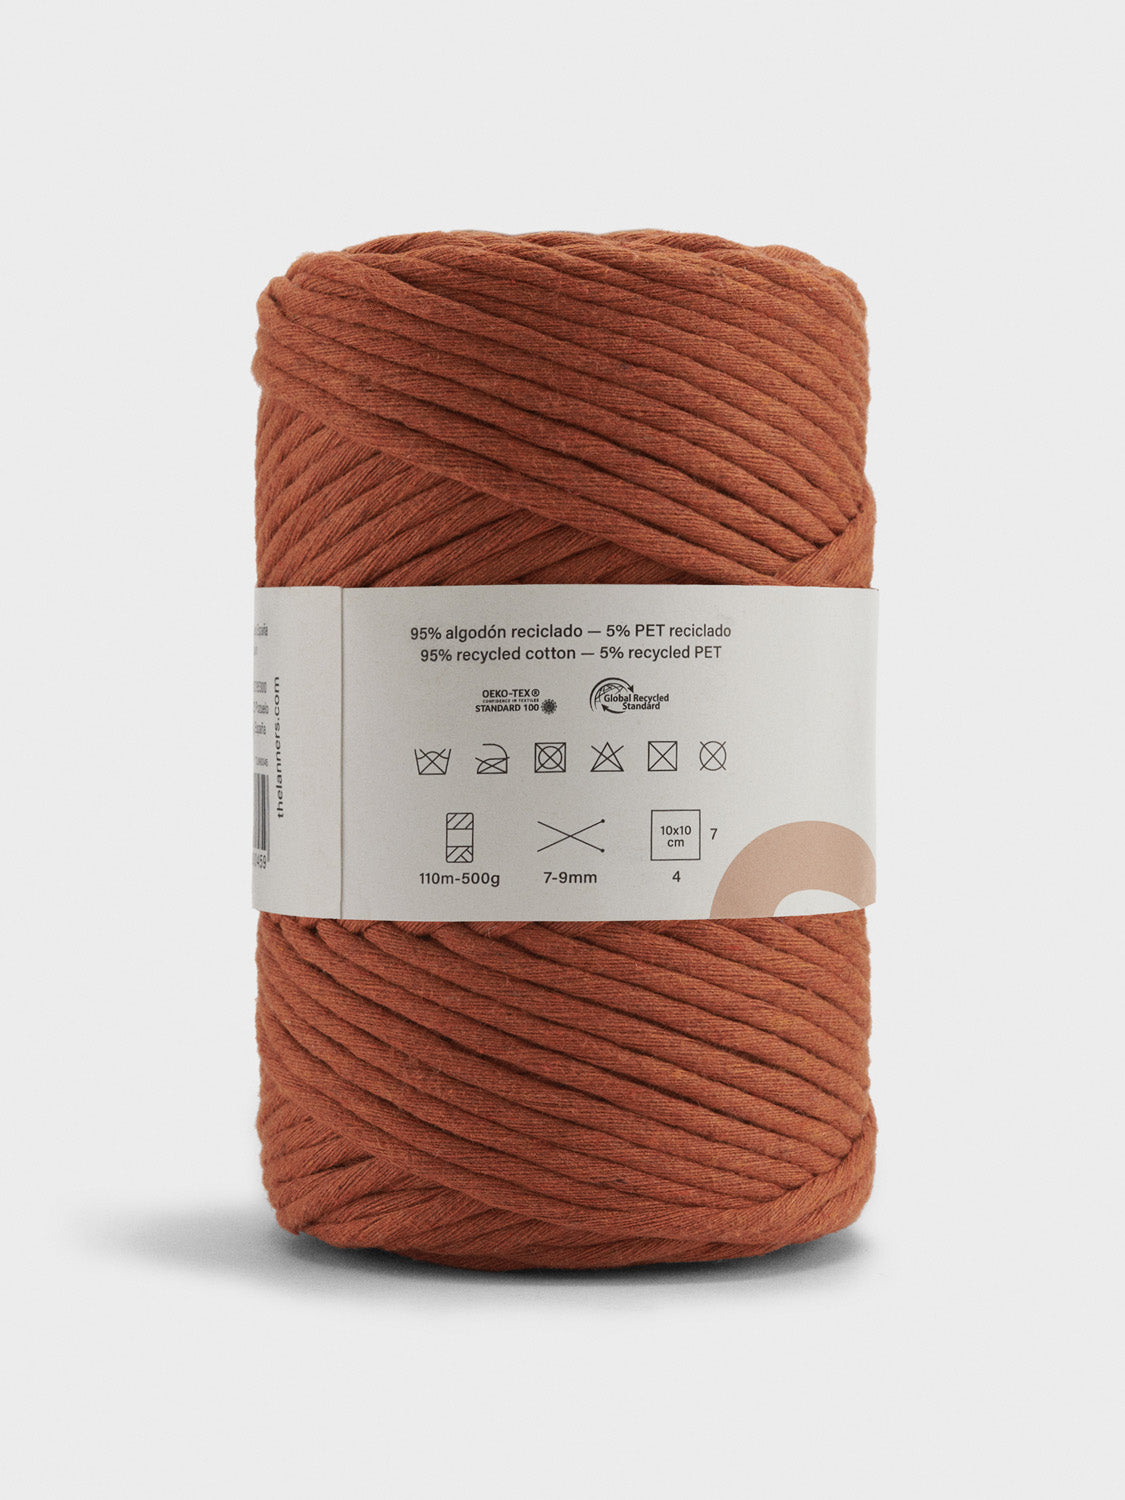 Boho Yarn – recycled cotton and recycled PET – 500 g – The Lanners